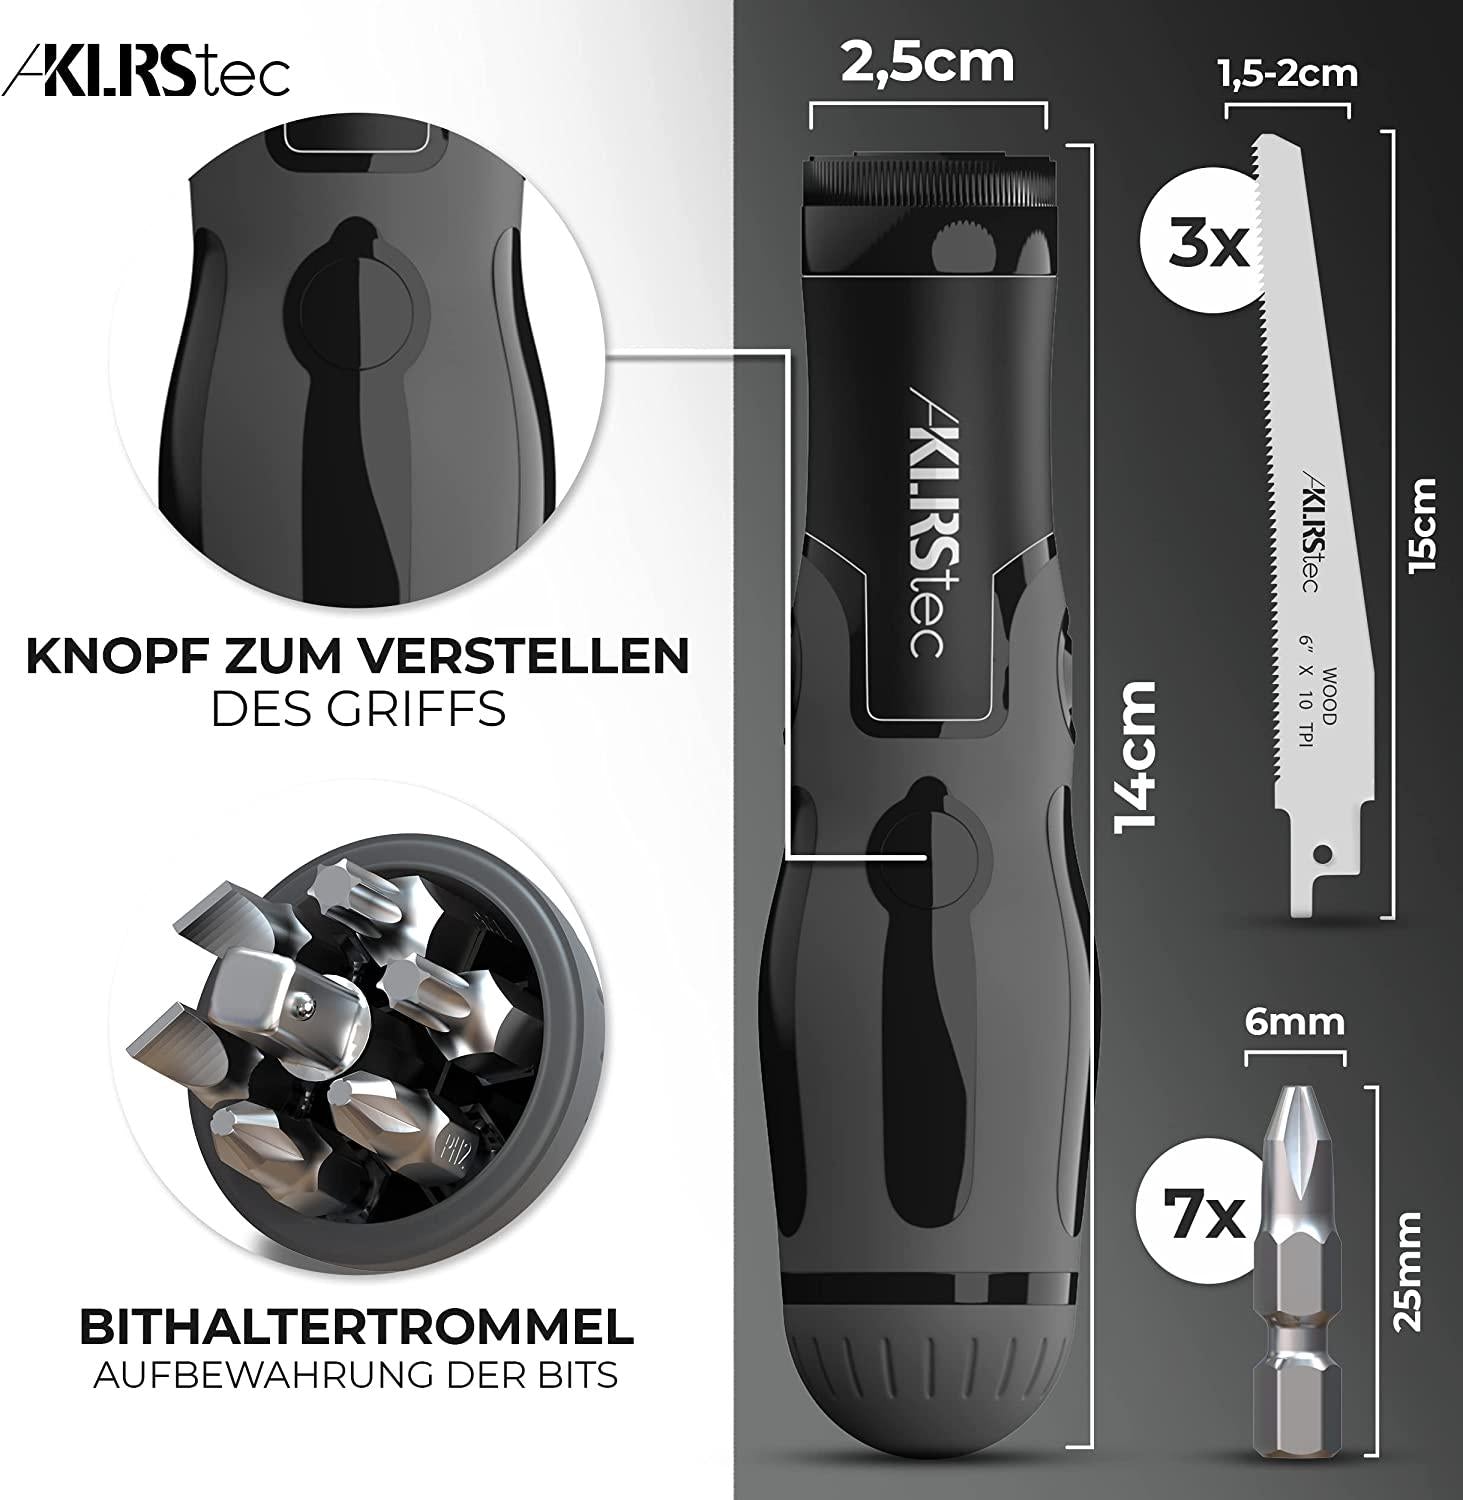 KLRS, KLRStec Professional Multitool 2 in 1 - bit Screwdriver Set and Hand Jigsaw in one 12 Pieces